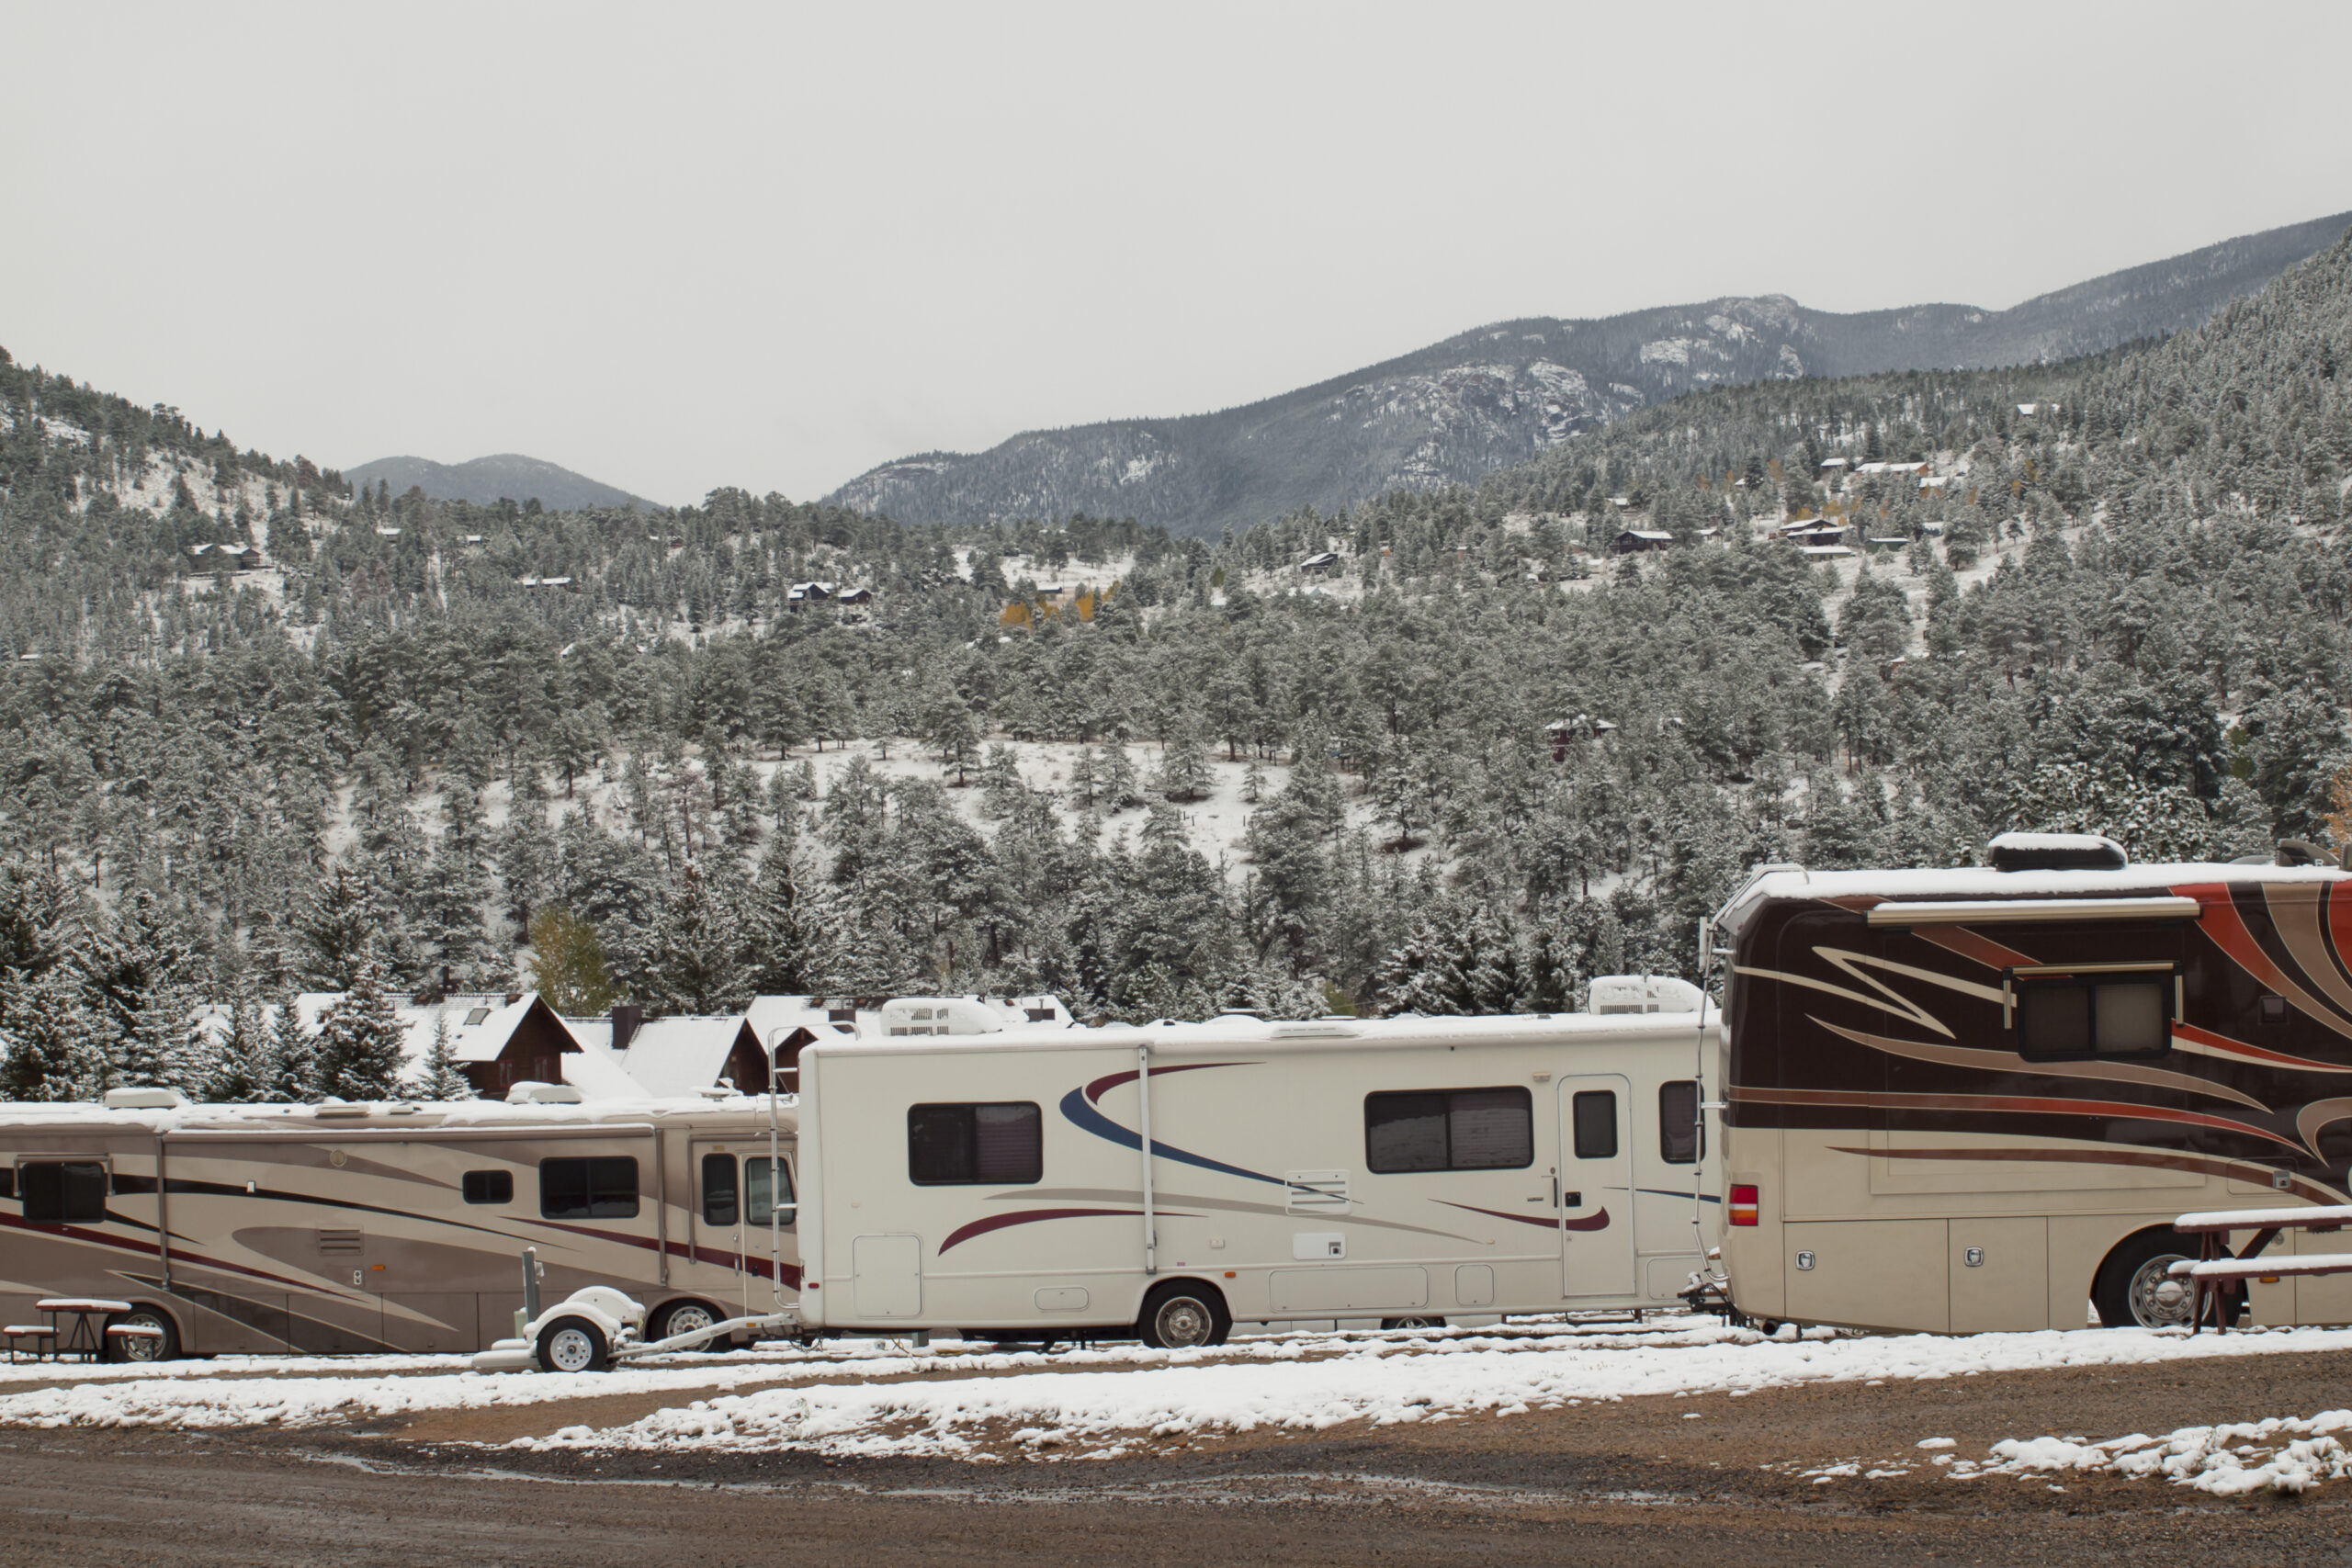 motorhomes in RV park covered in snow - How To Insulate A Camper For Winter Use